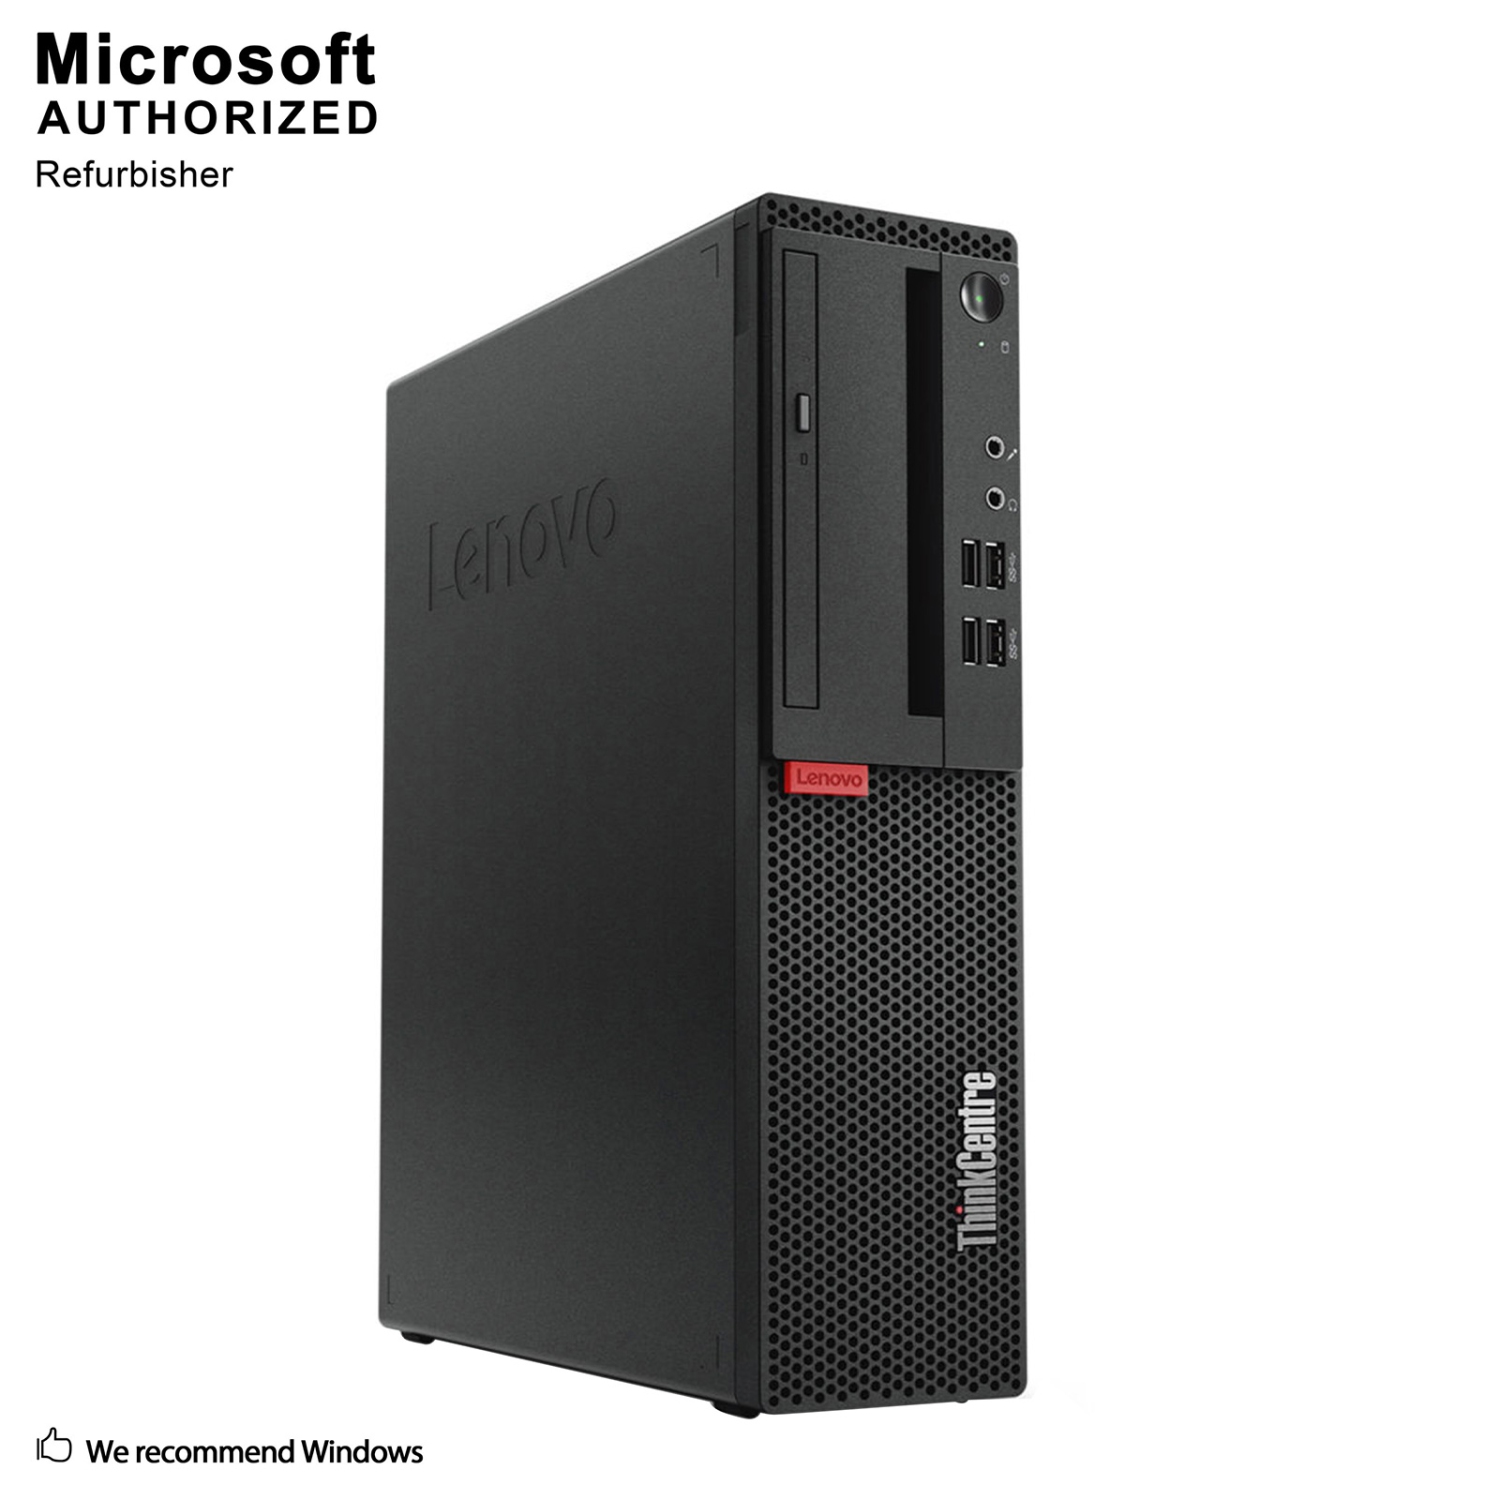 Refurbished (Good) - Lenovo ThinkCentre M910S SFF PC, Intel Core I5-6500 3.2Ghz, 16G DDR4, 256 GB SSD, DVD, 4K Support, Keyboard & Mouse, Win 10 Pro 64-bit (EN/ES/FR)